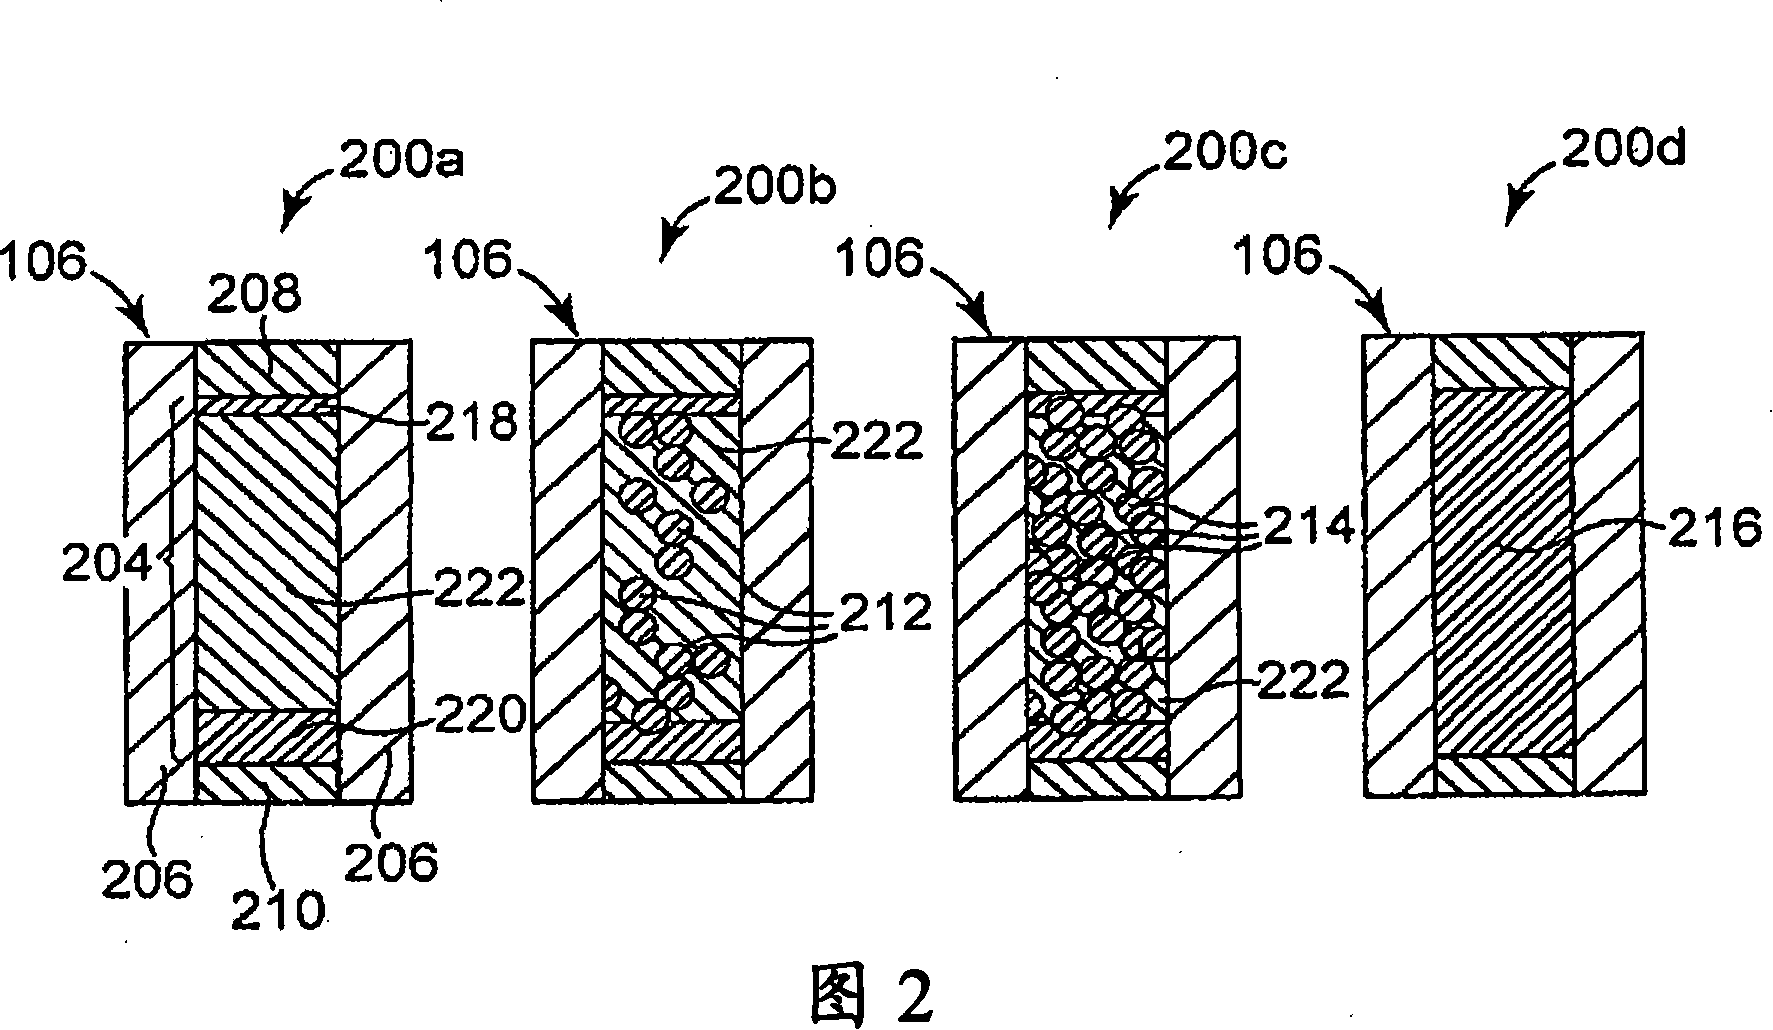 Semiconductor device including multi-bit memory cells and a temperature budget sensor